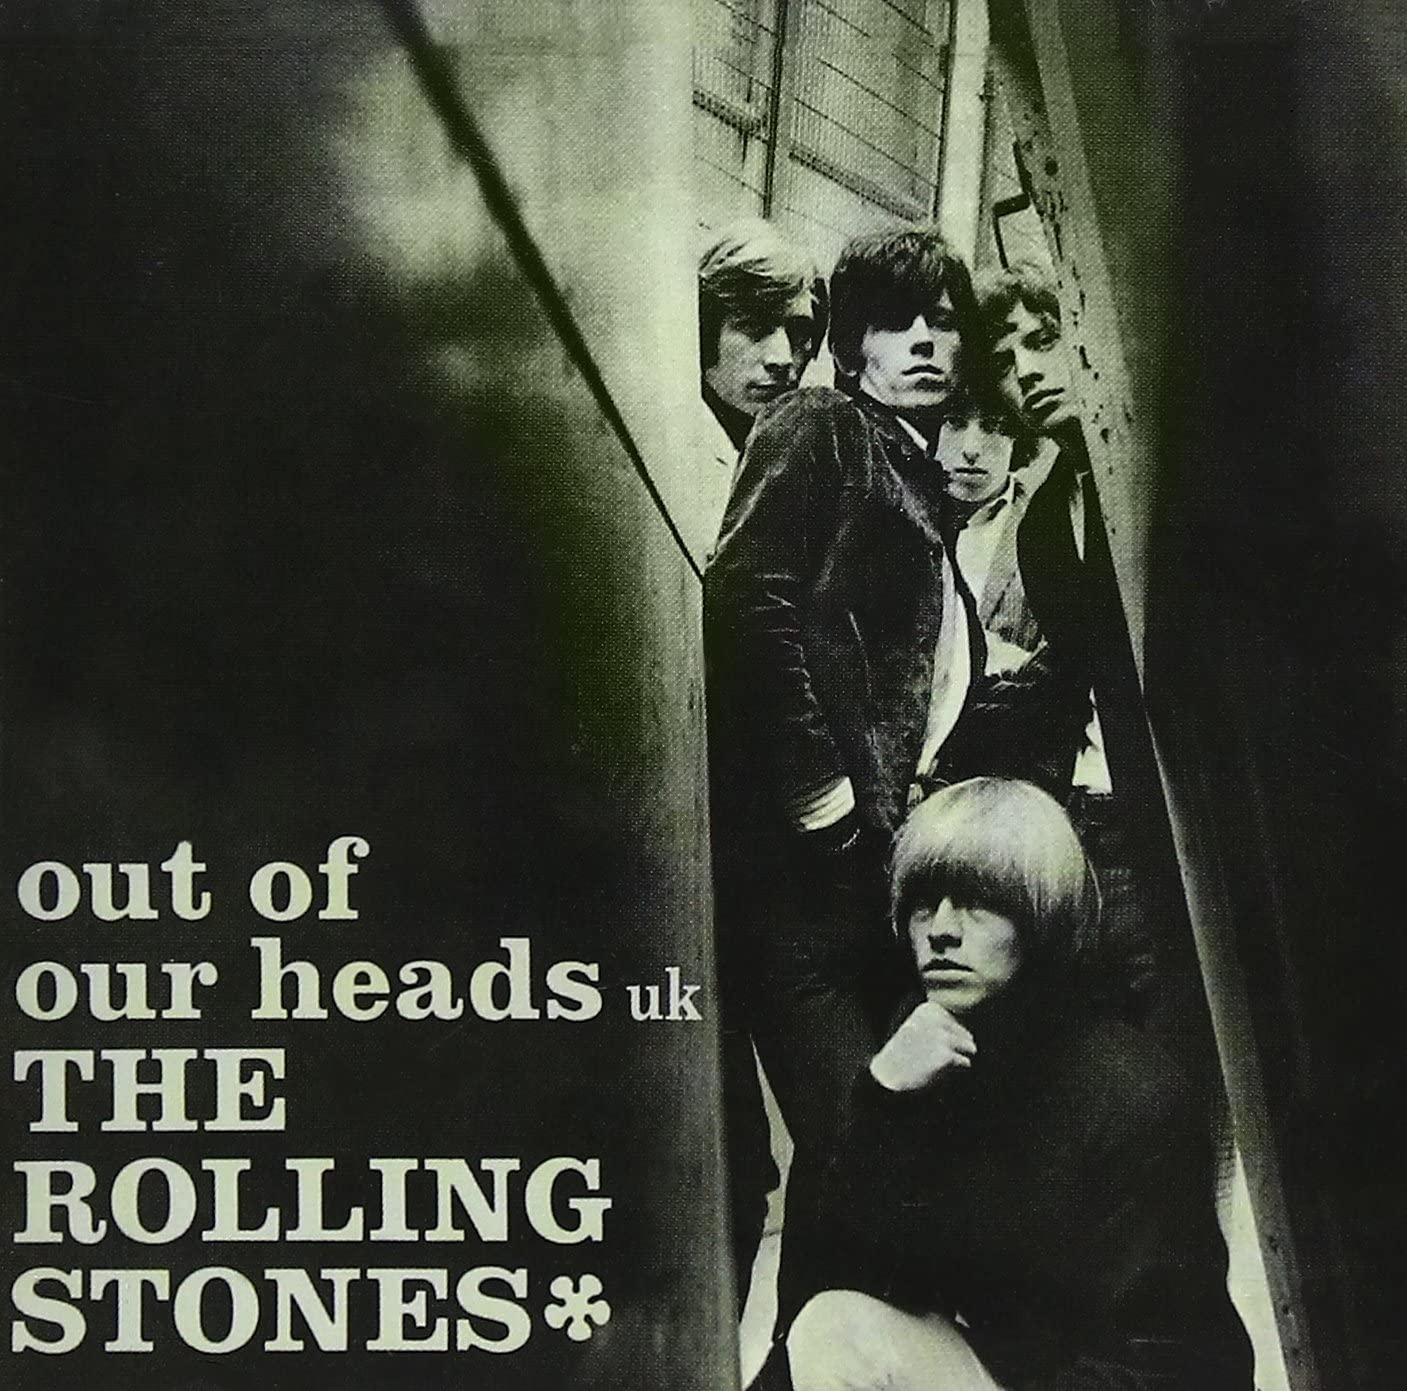 THE ROLLING STONES - OUT OF OUR HEADS UK - VINYL LP - Wah Wah Records